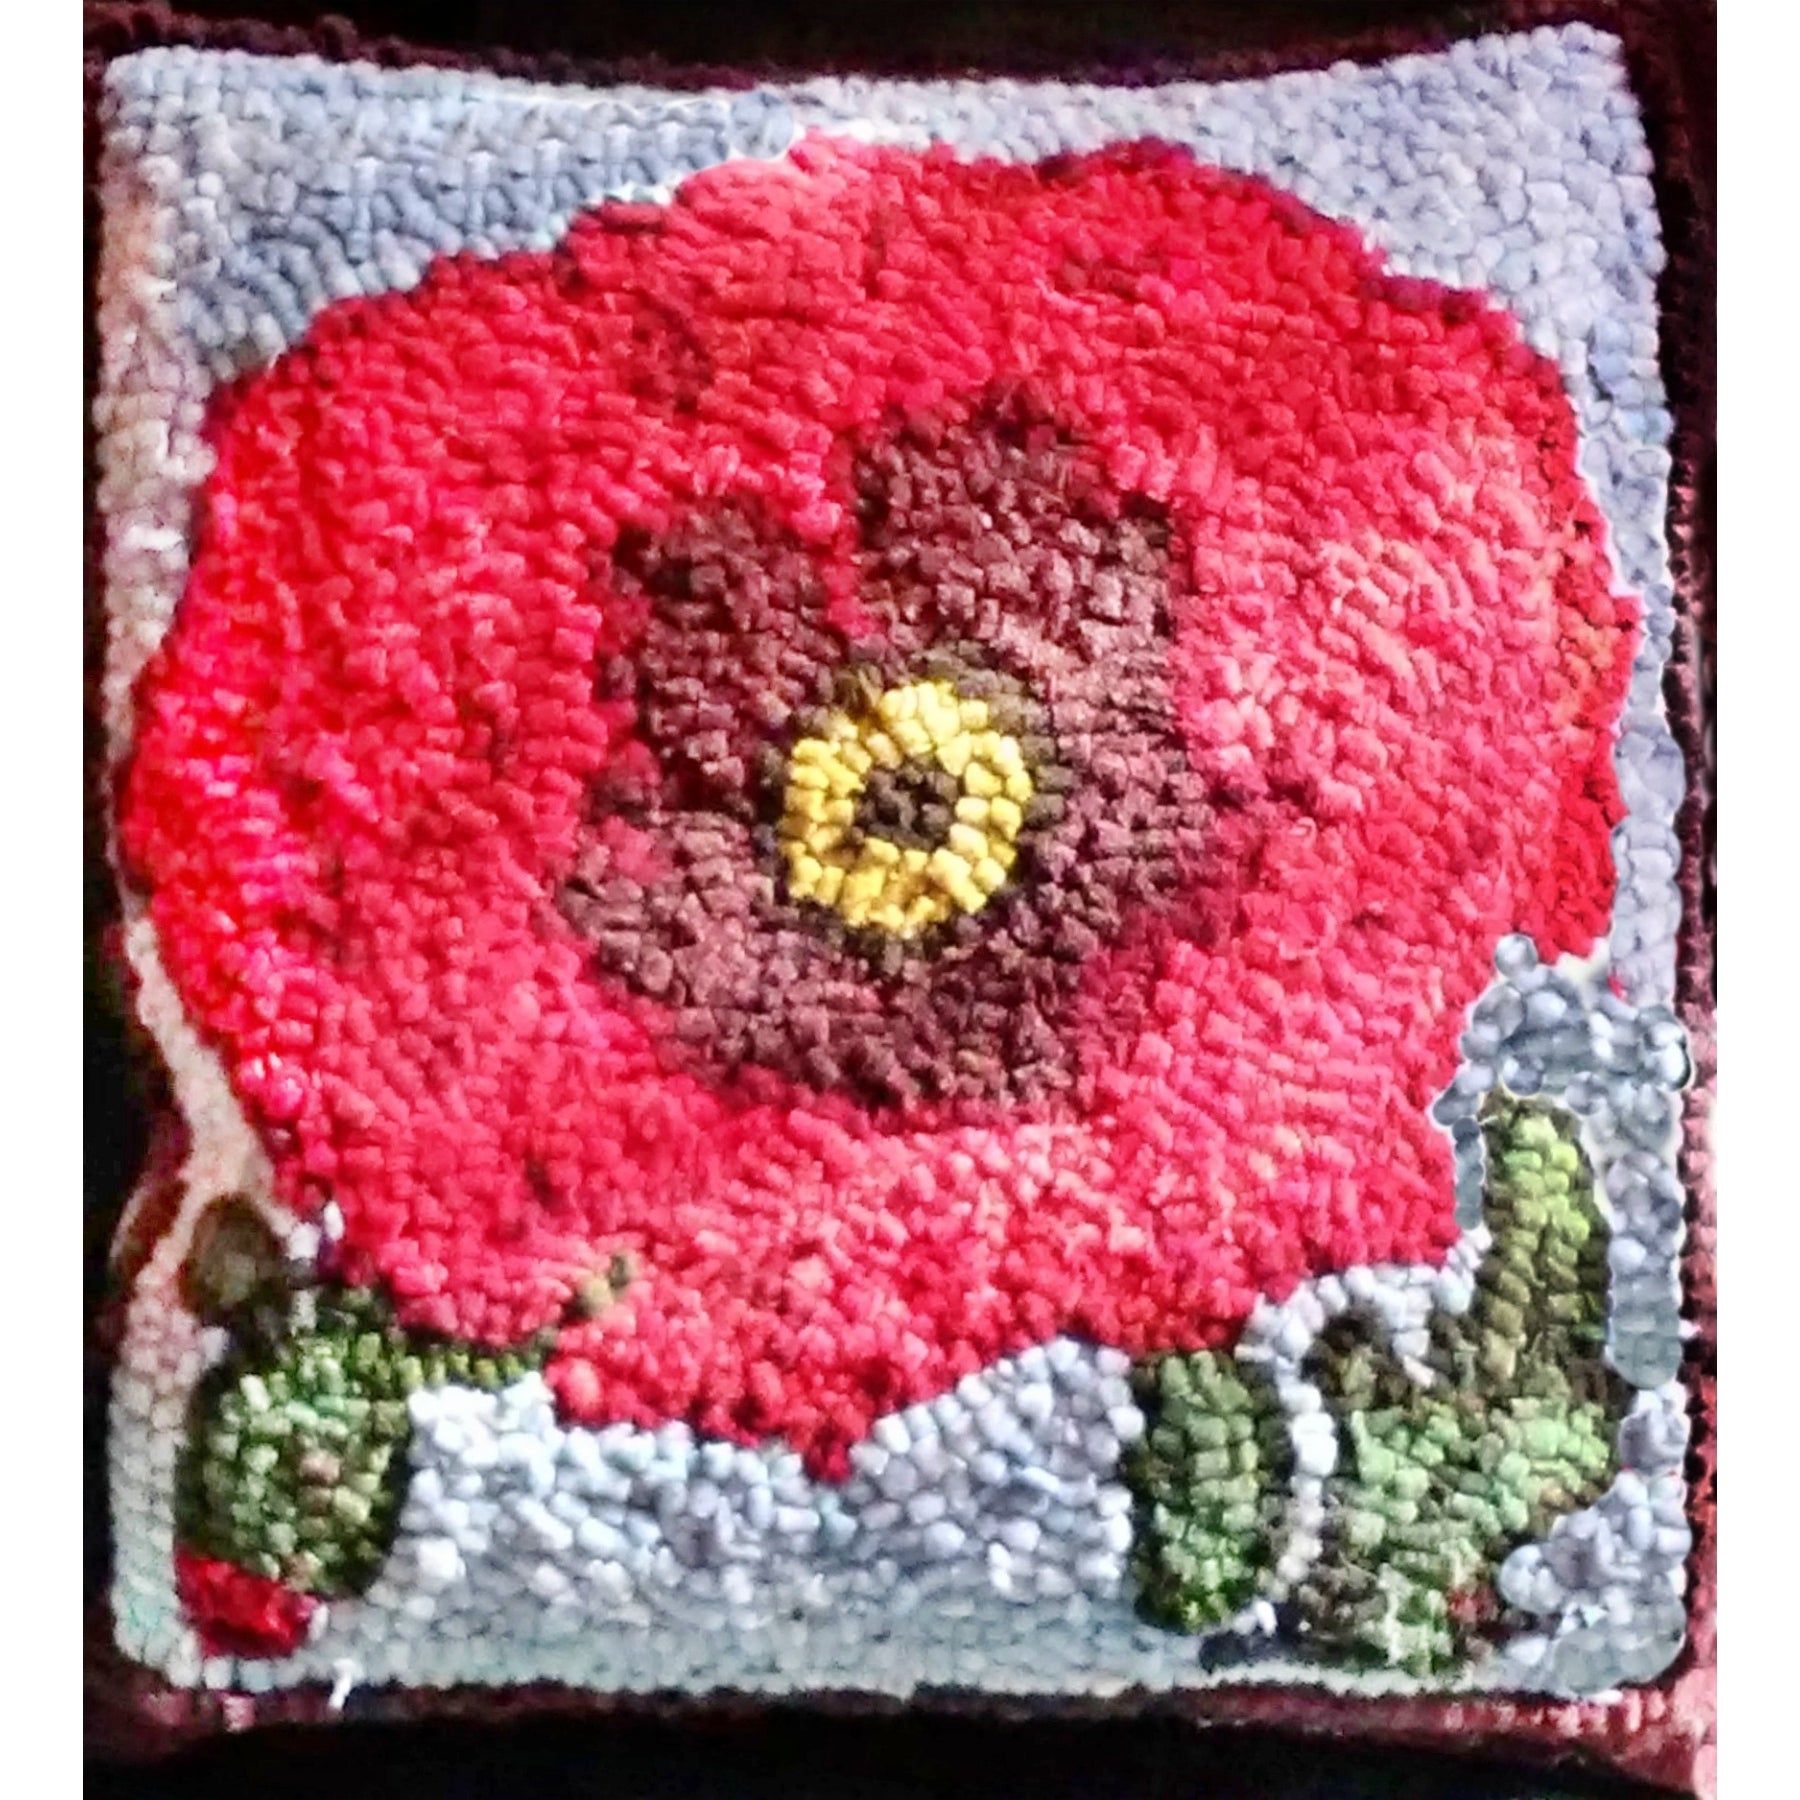 Poppy-A La O'Keefe, rug hooked by Theresa Nevin